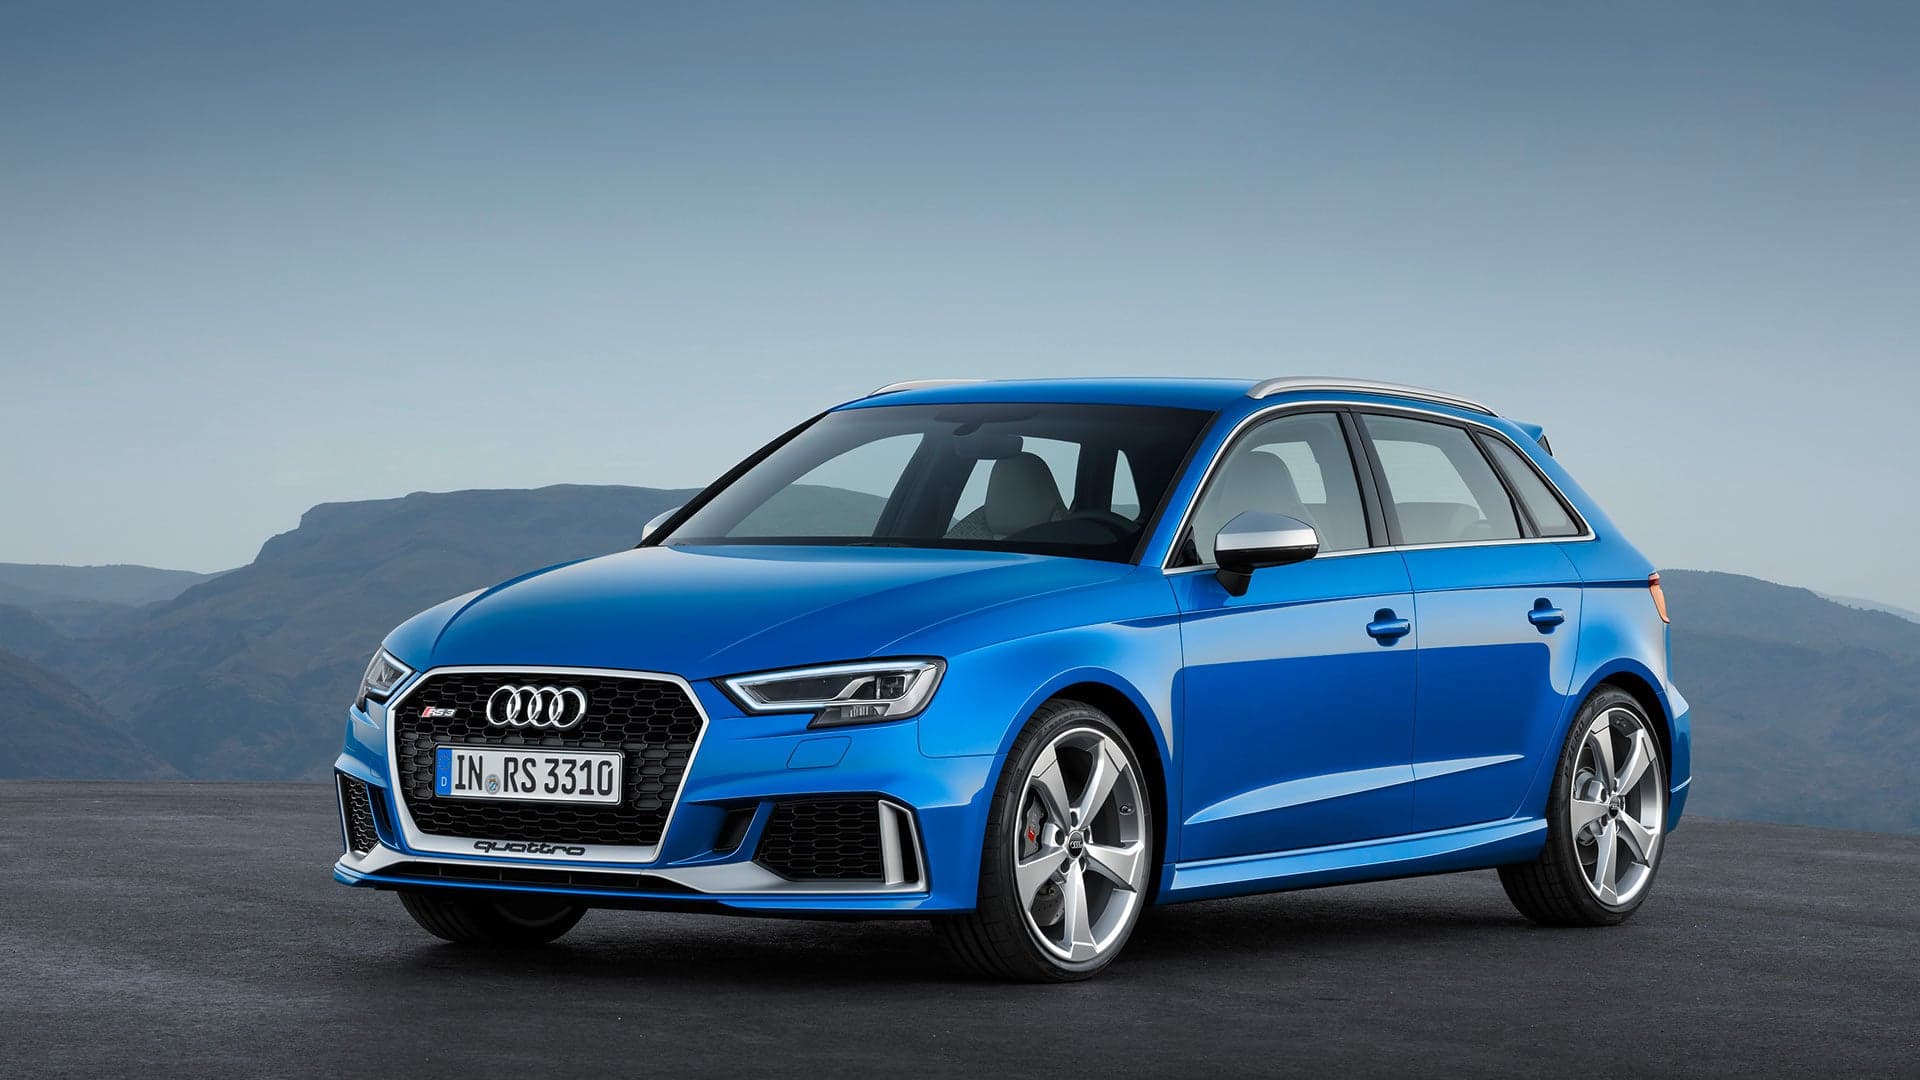 The 2018 Audi RS 3 Sportback is One Mean Grocery Getter